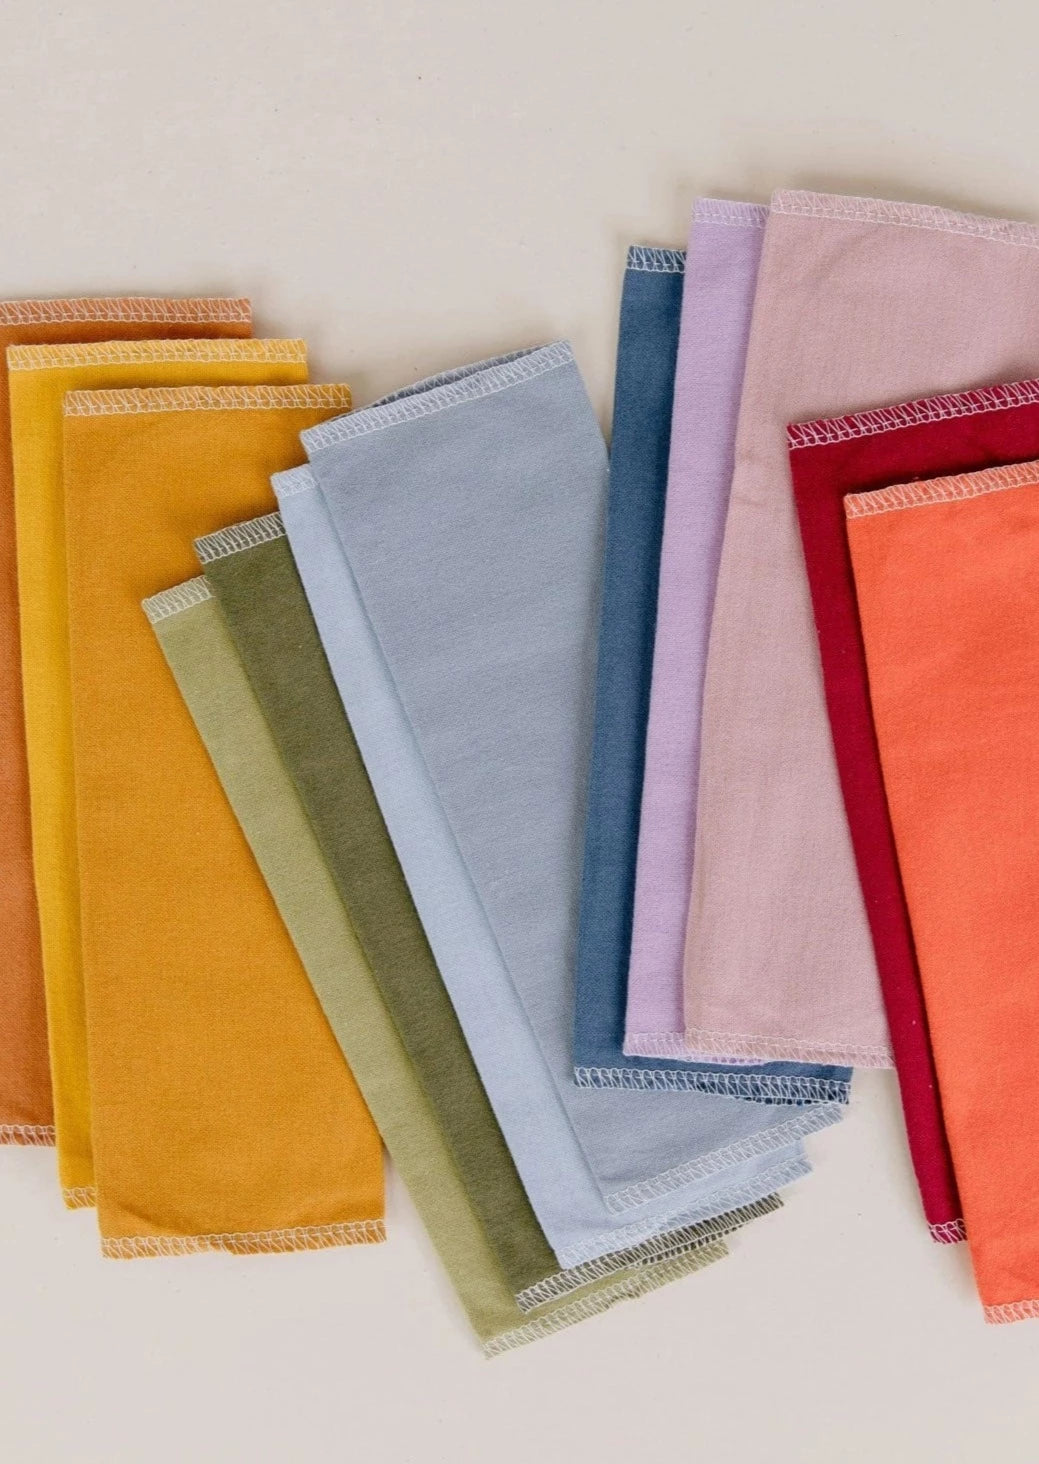 Twelve Reusable Paper Towels in a Variety of Colors